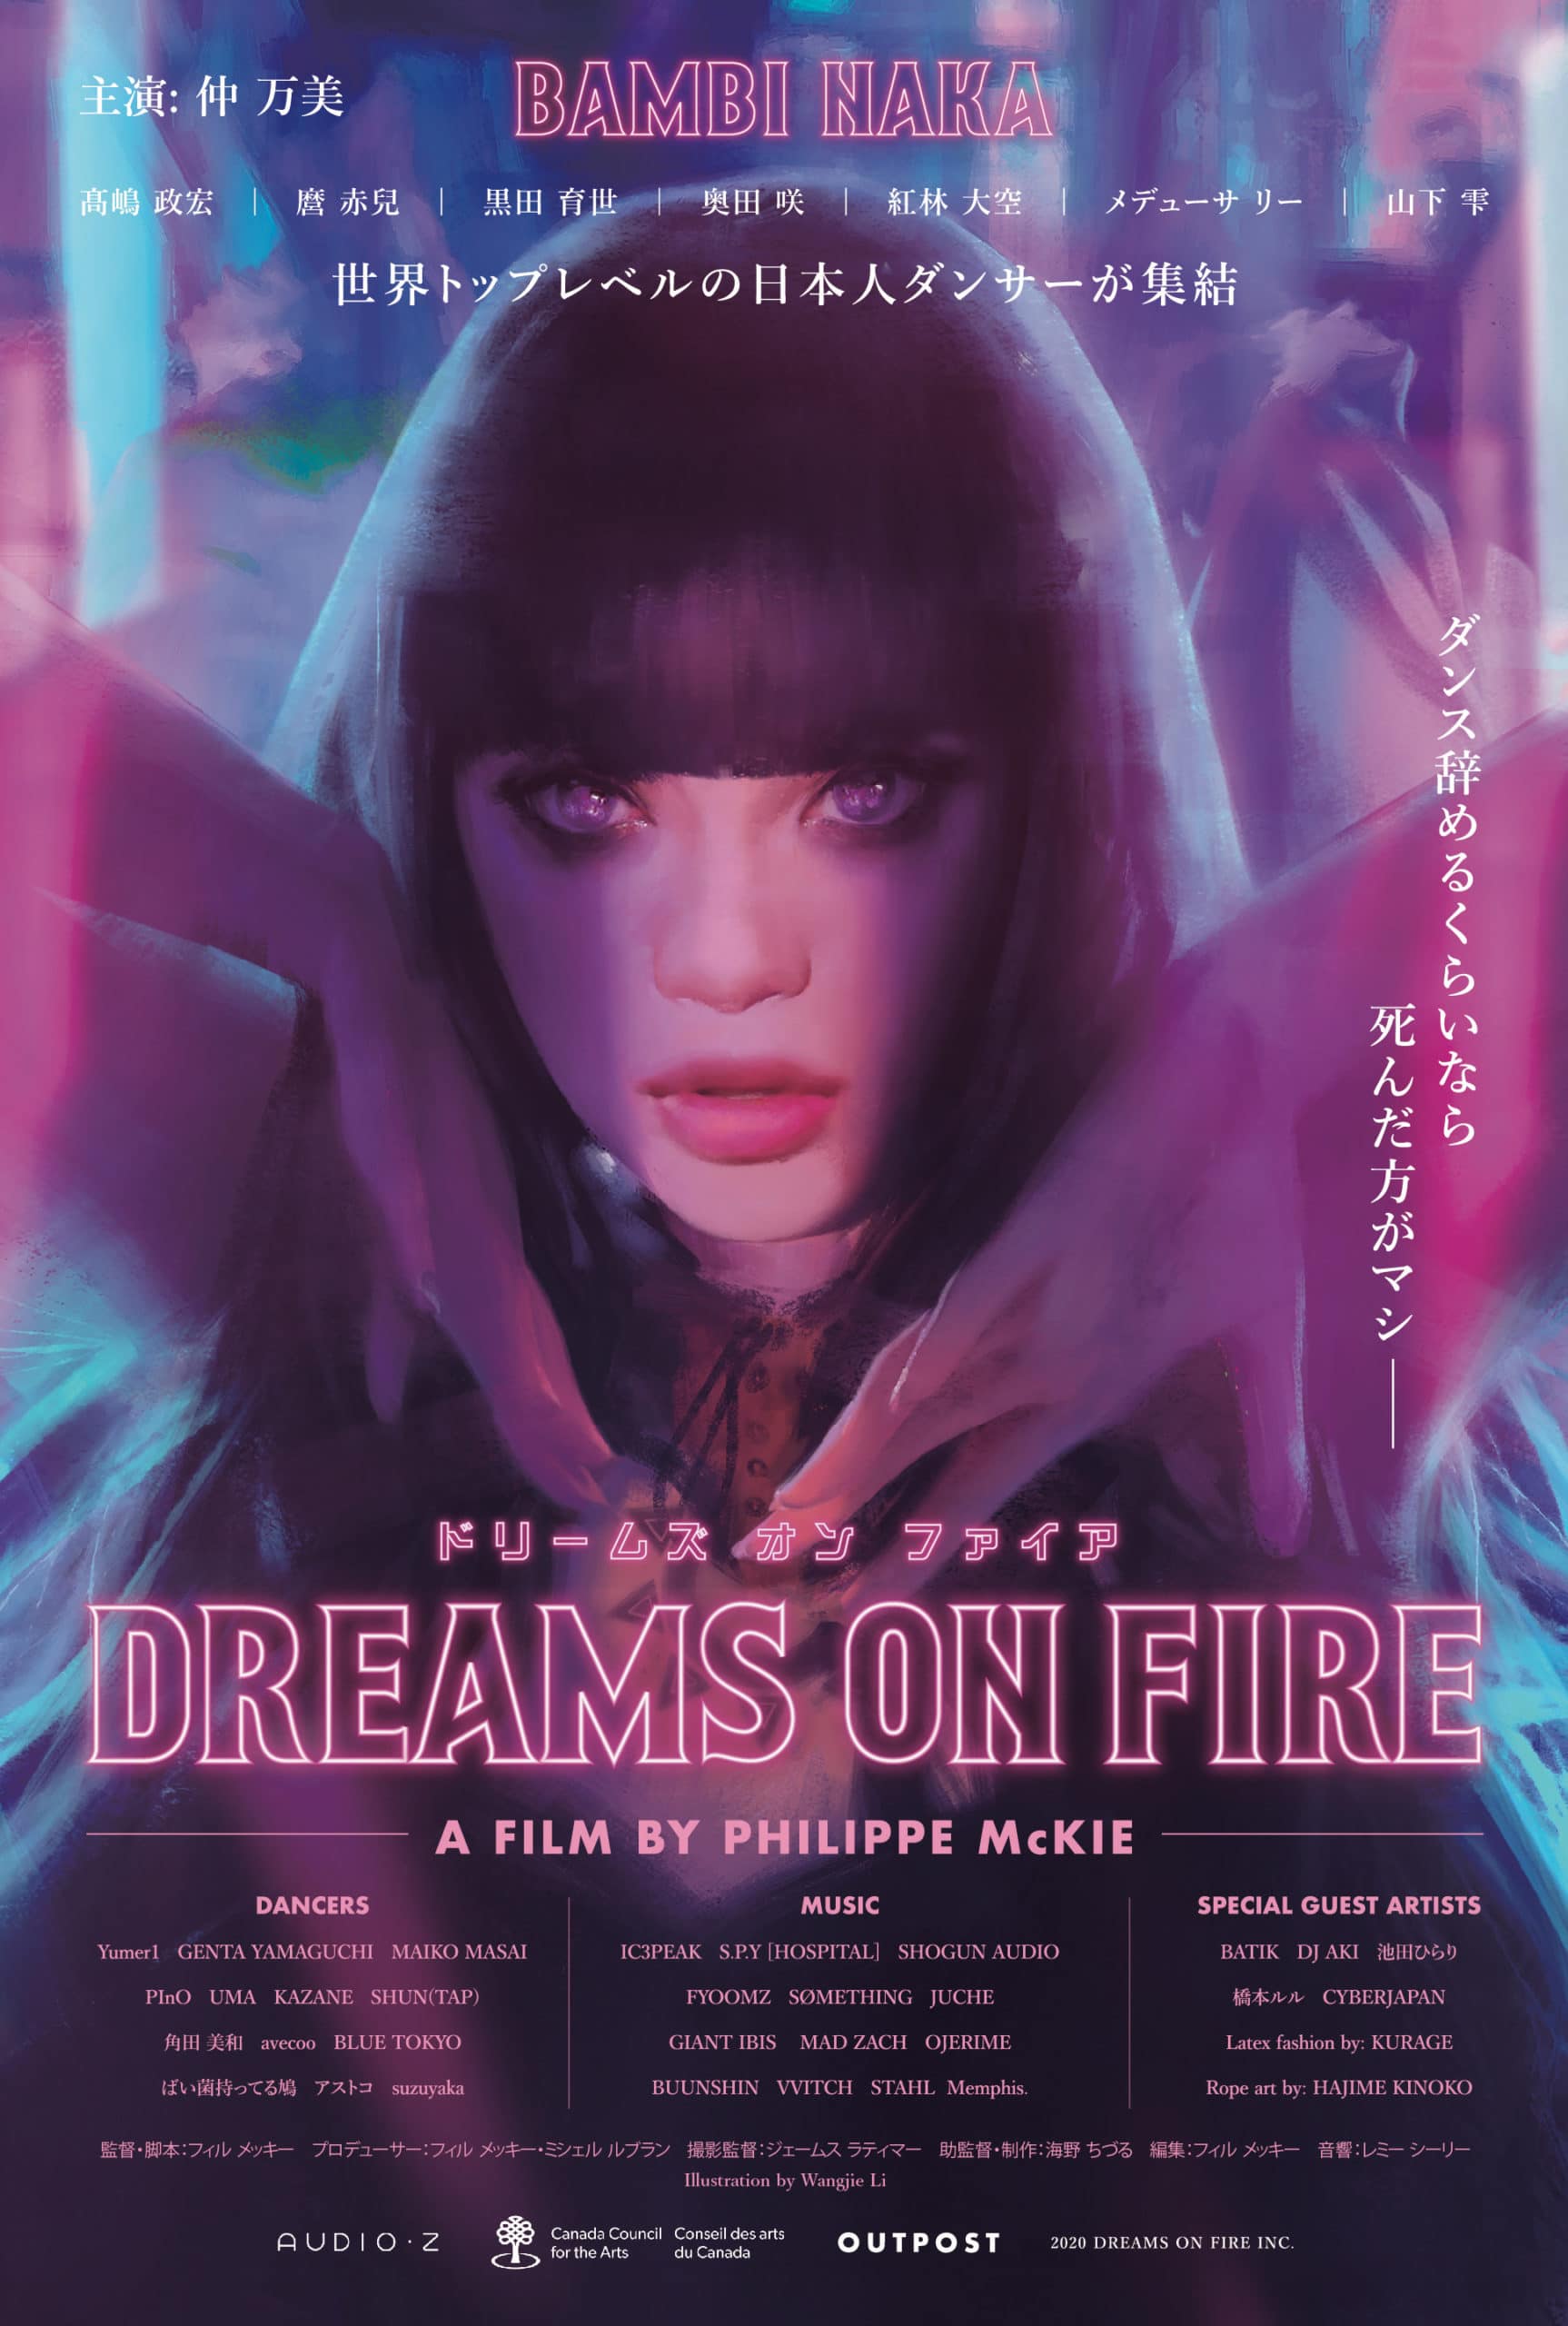 Dreams on Fire Movie Poster with Bambi Naka as Yume